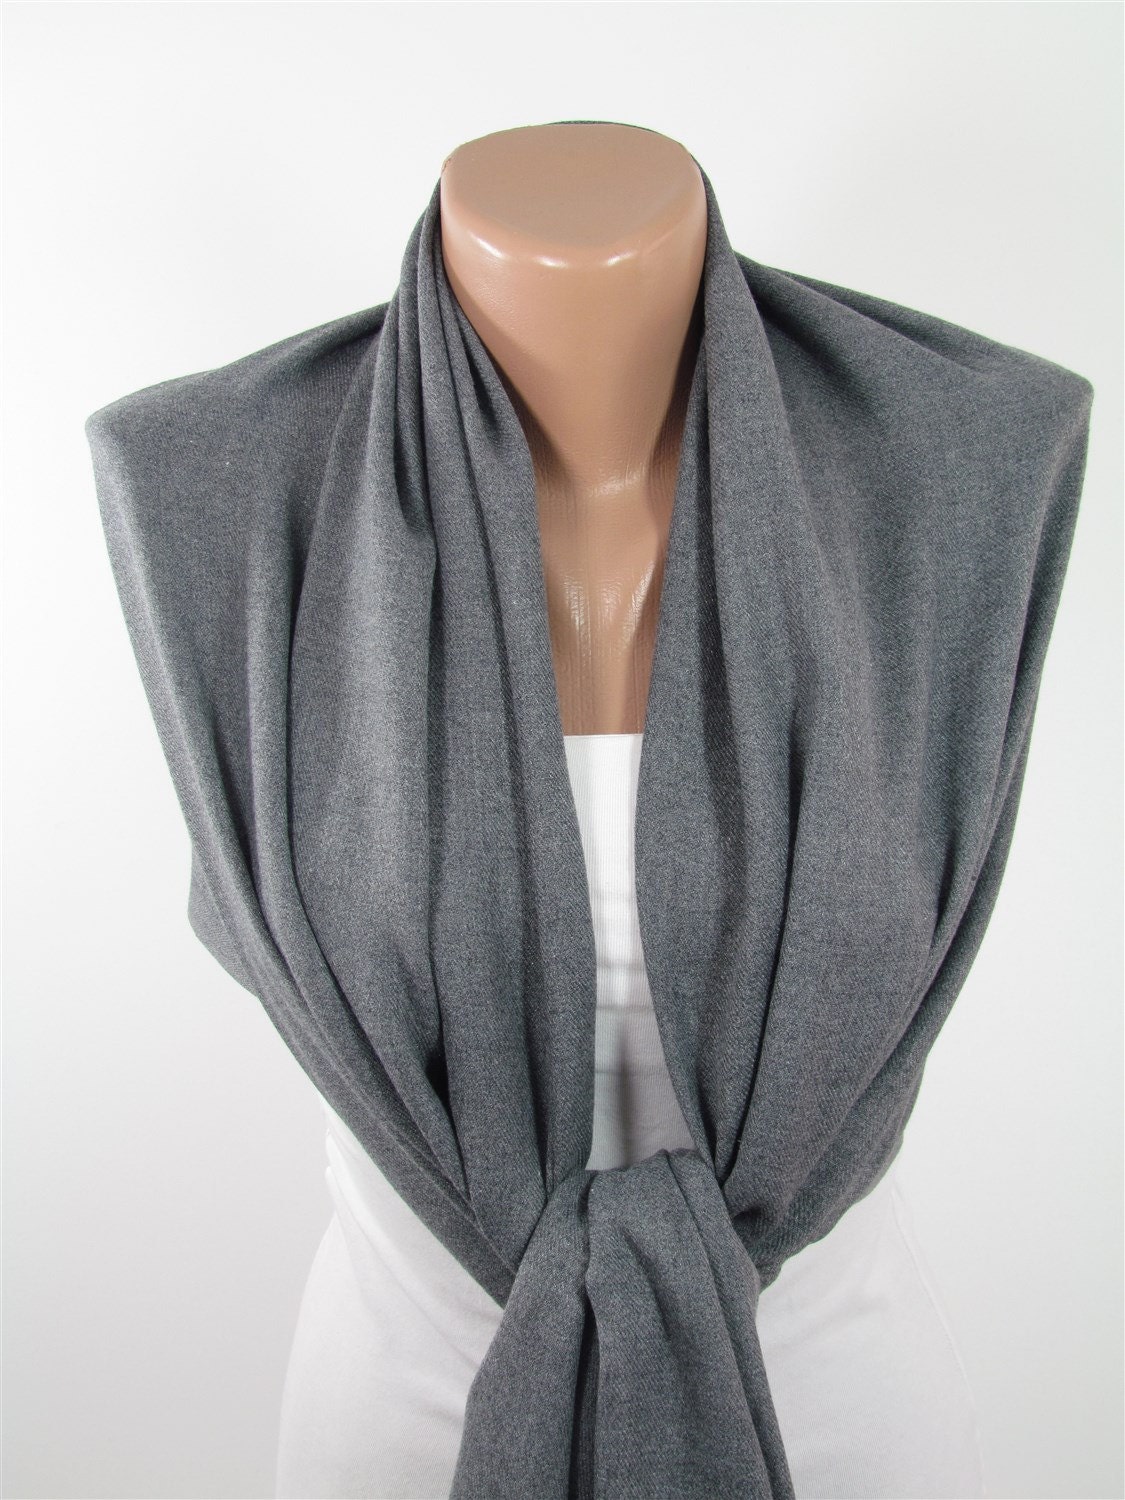 Gray Pashmina Scarf Men Winter Scarves For Women Accessories | Etsy